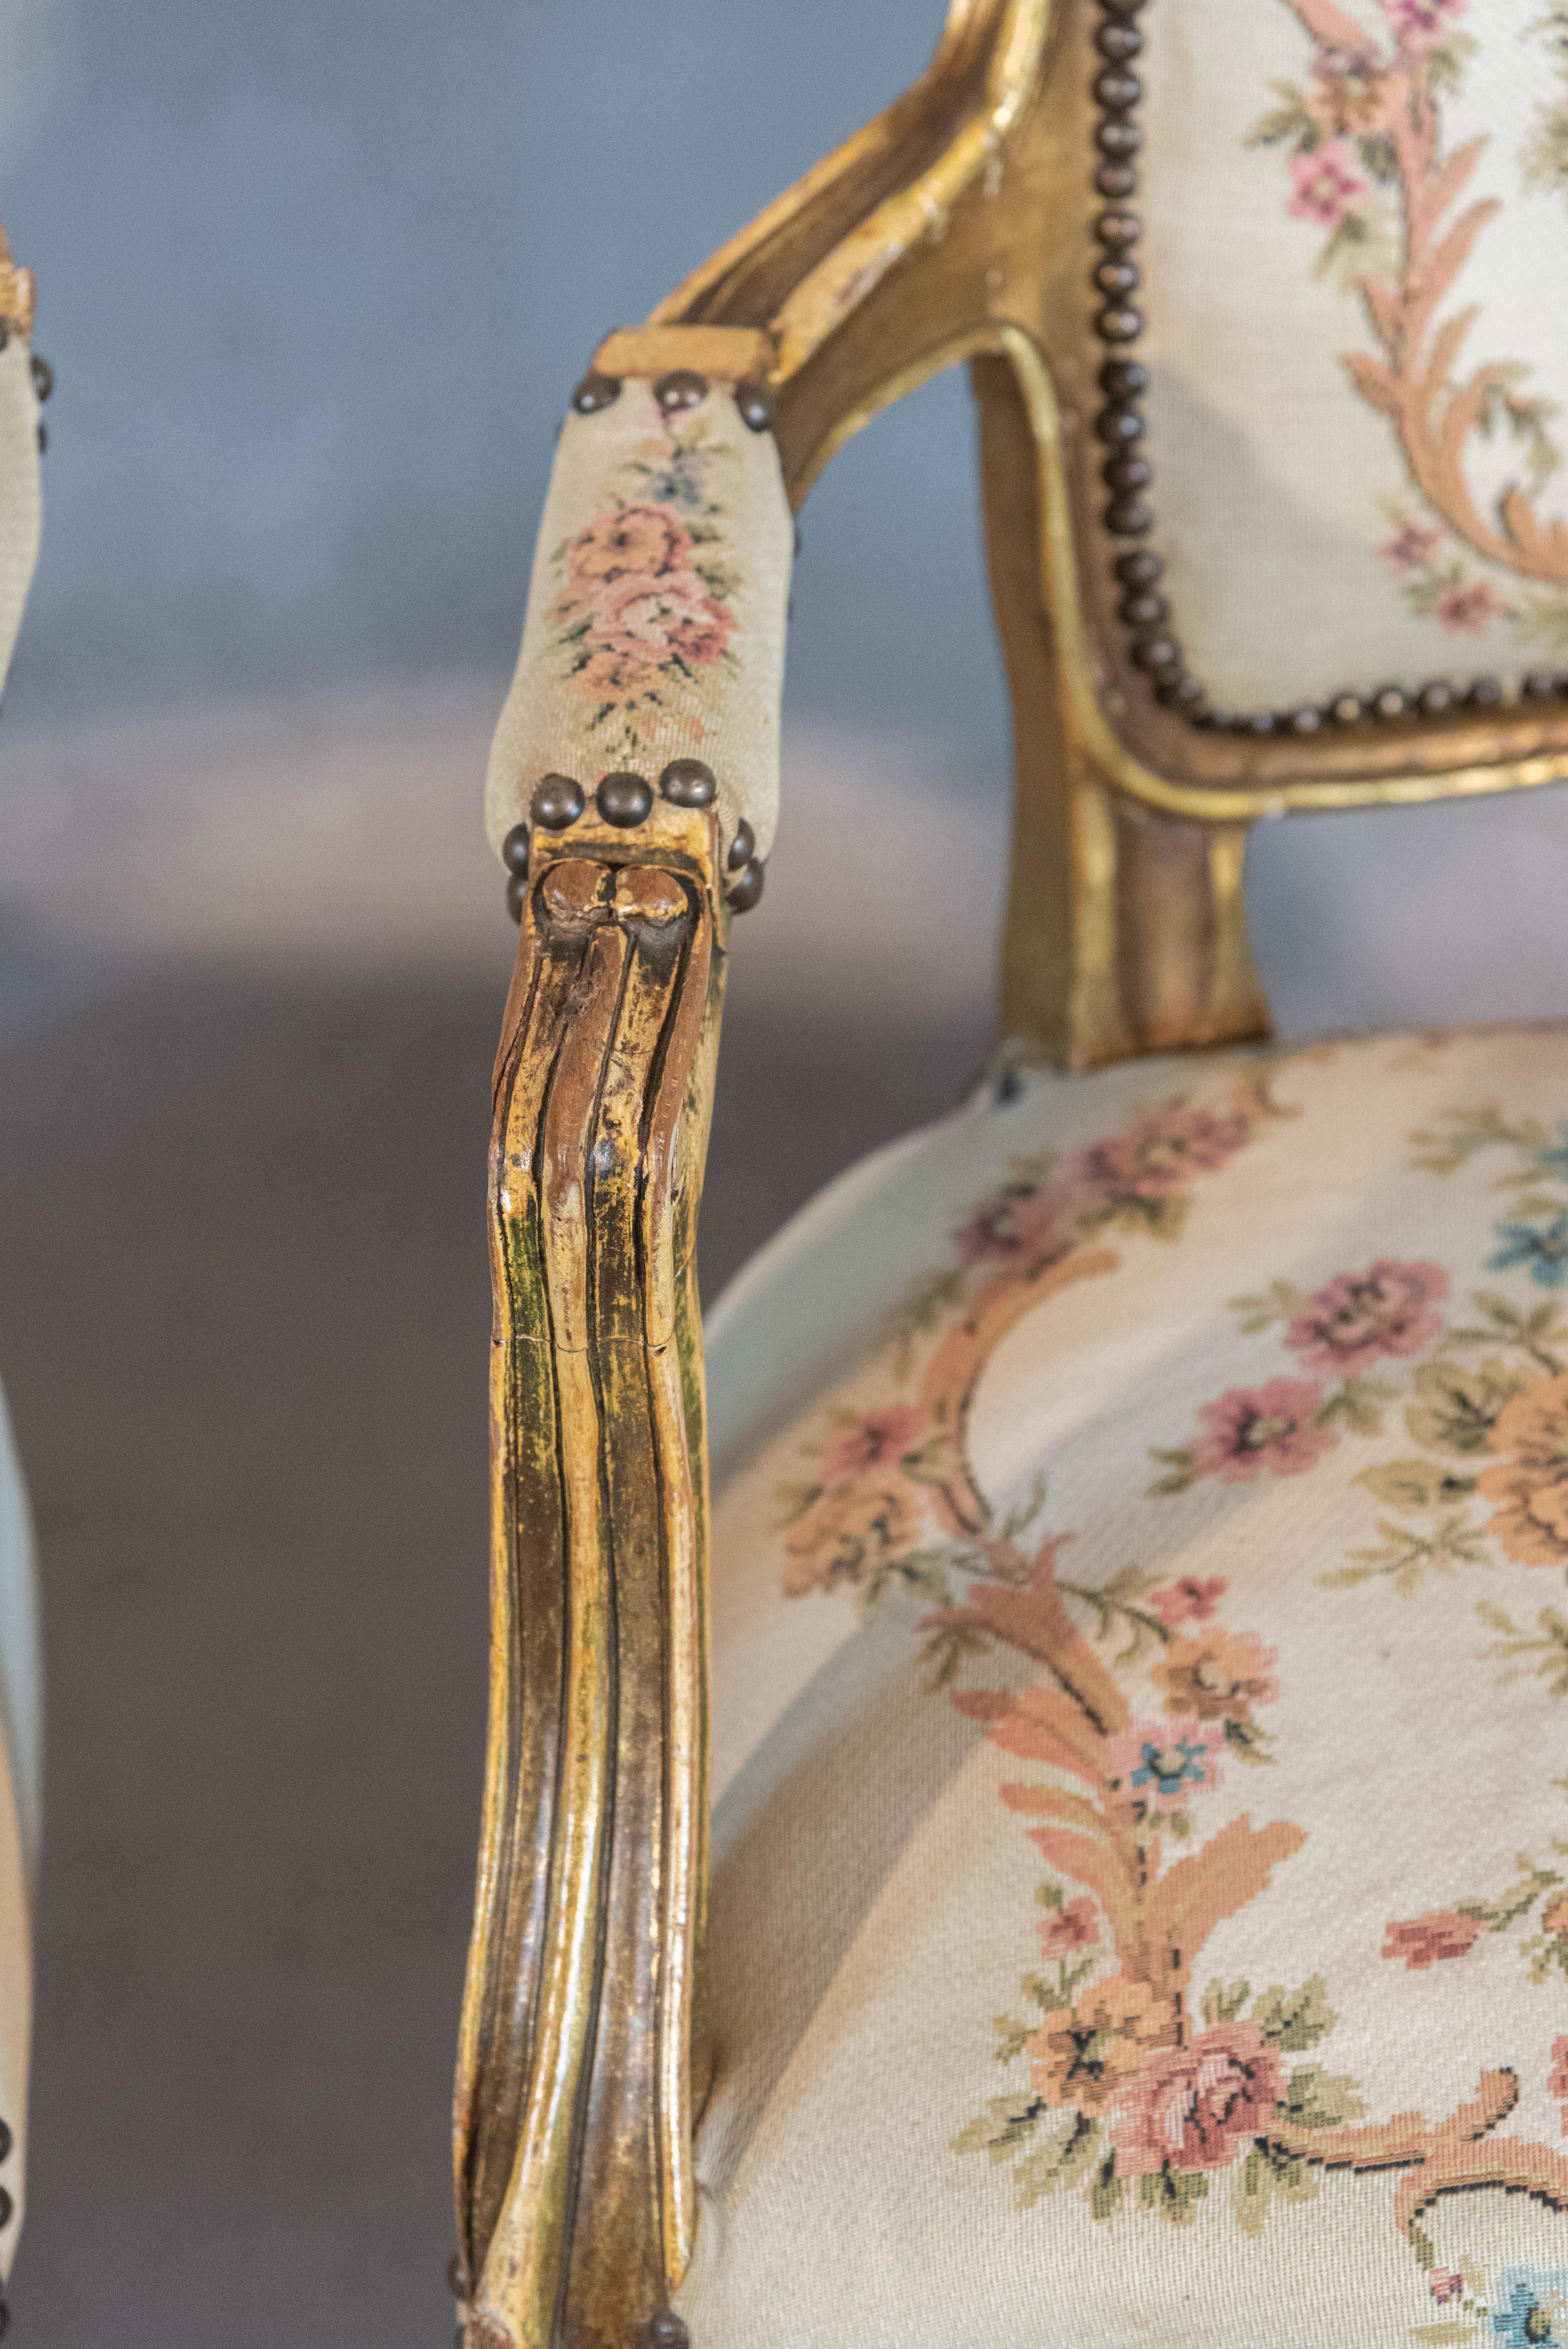 An astounding 19th century French Louis XV Style pair of armchairs. These armchairs are known as “cabriolet” and feature a Romantic depiction on the backrests and beautiful floral motifs on the seating. The contrast between the solid frame and the